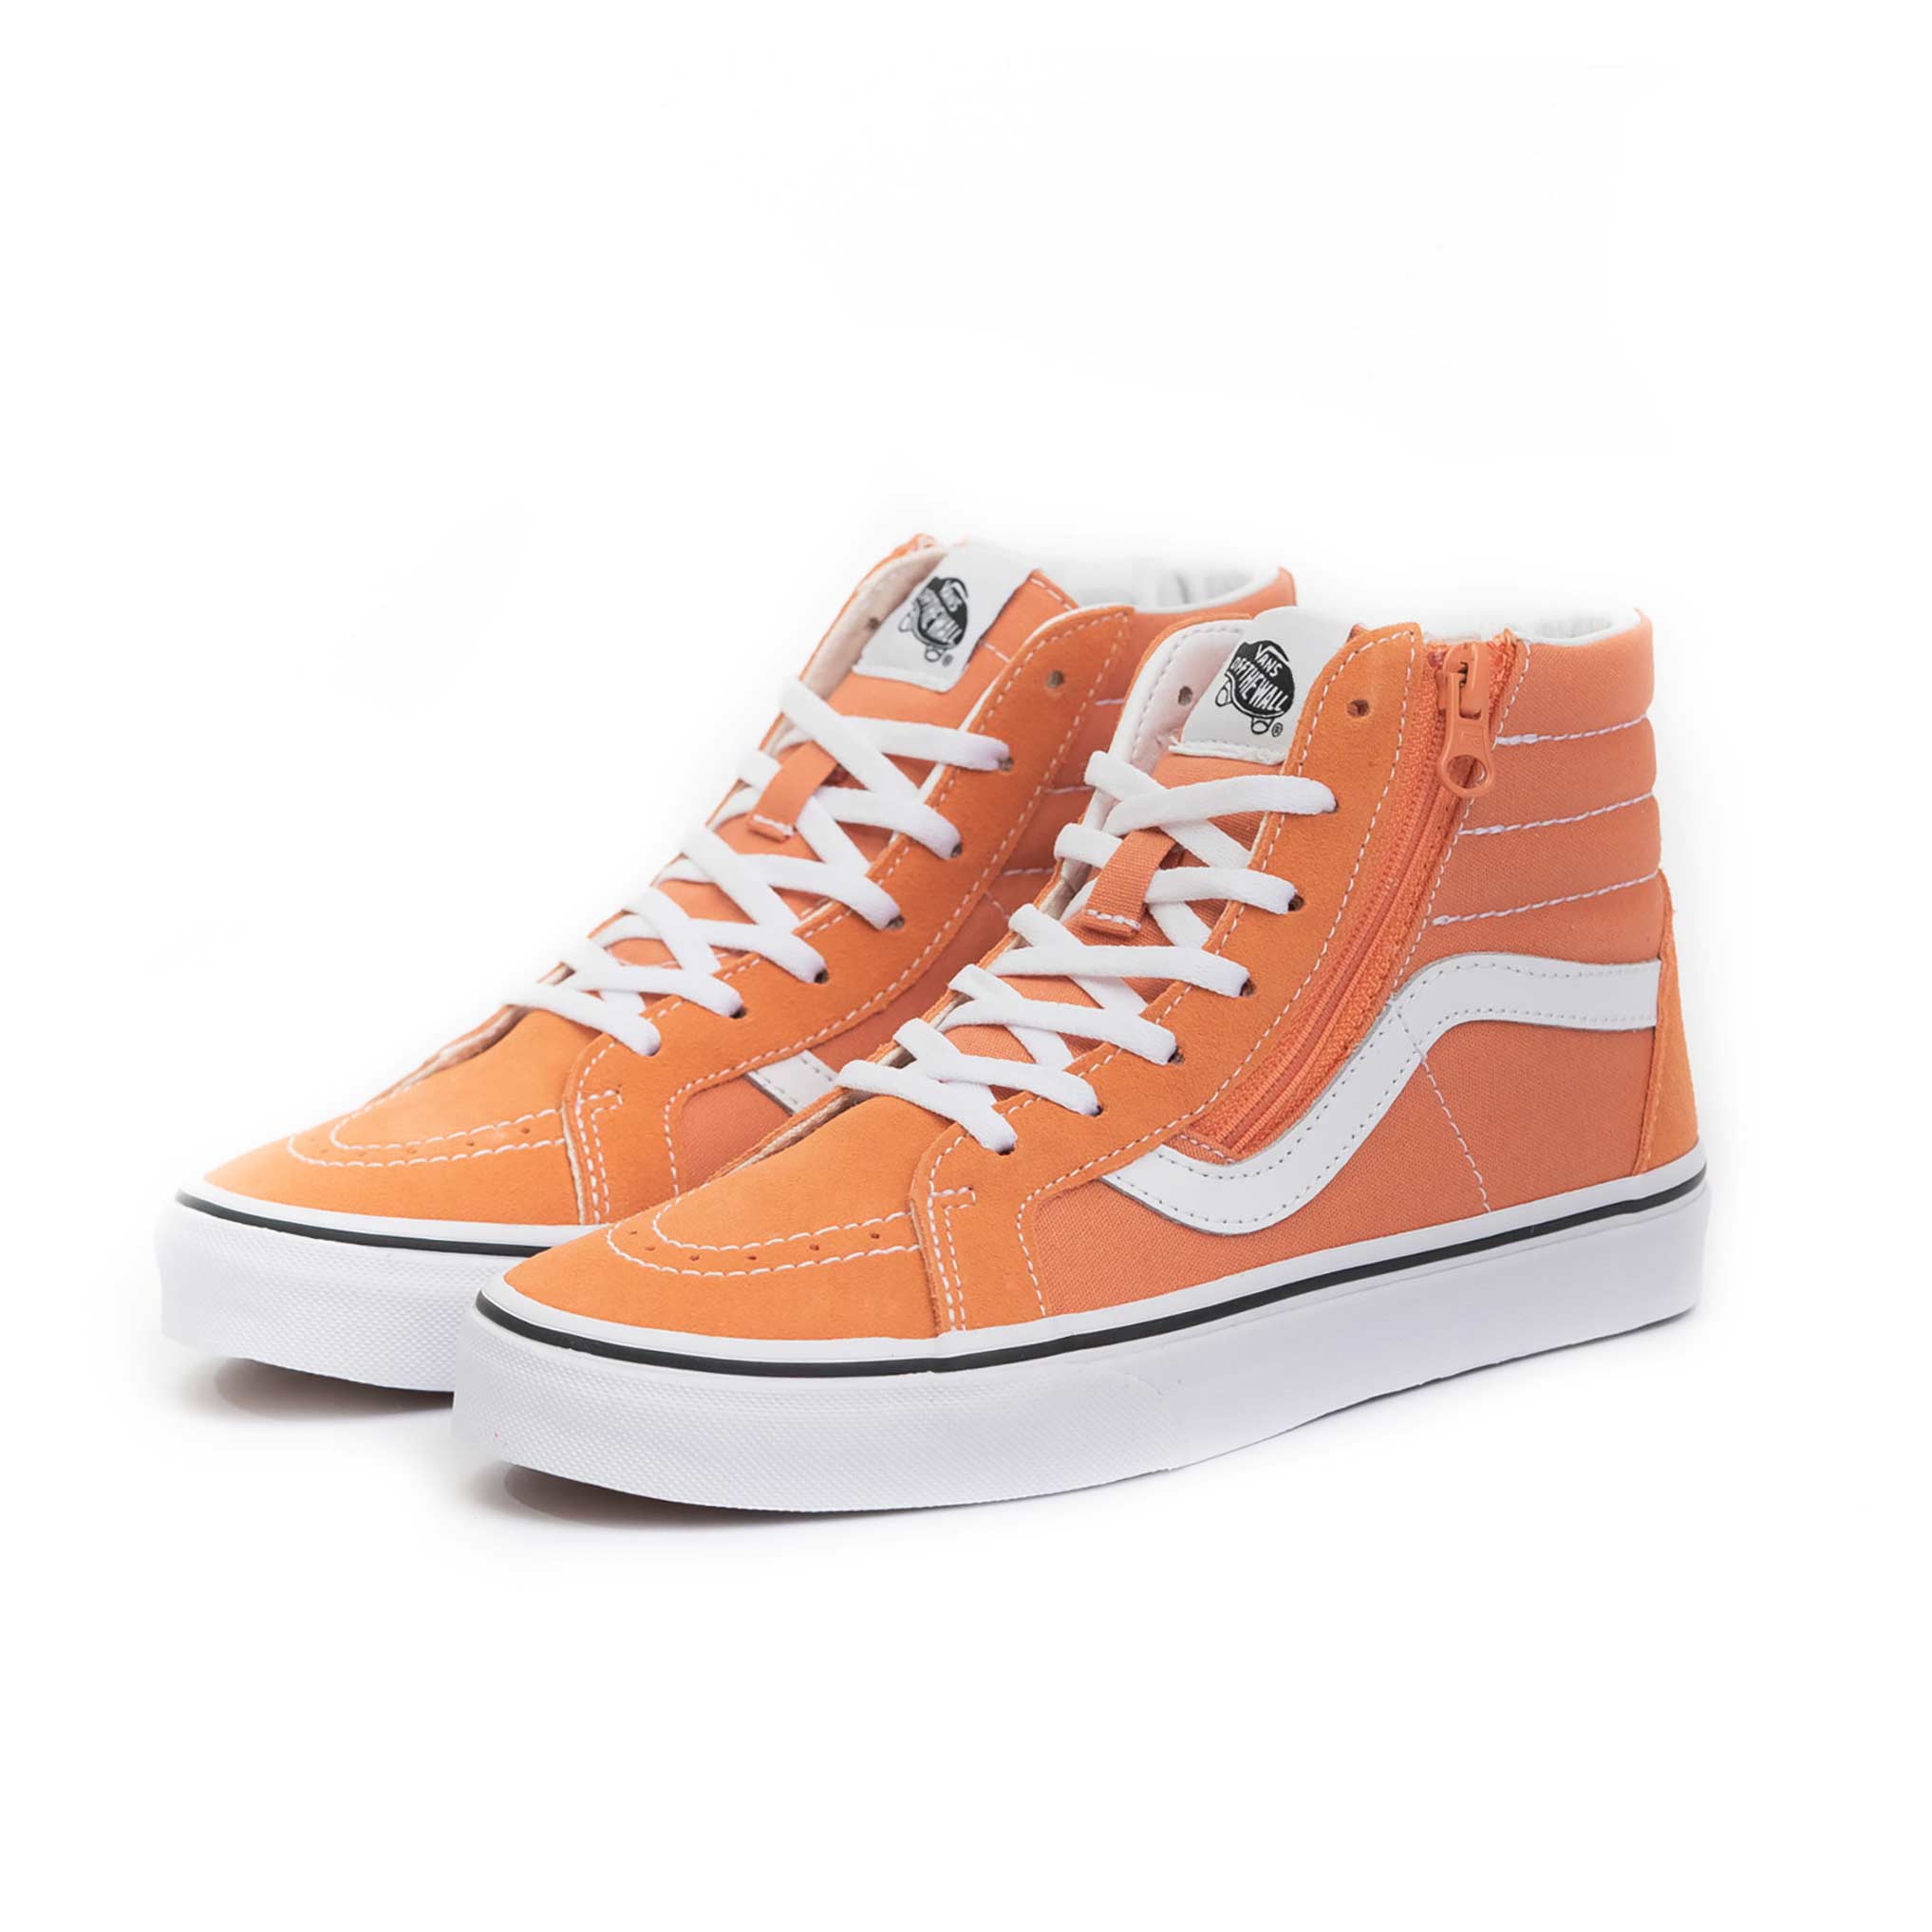 Vans Sk8-Hi Reissue Si Color Theory Sun Baked